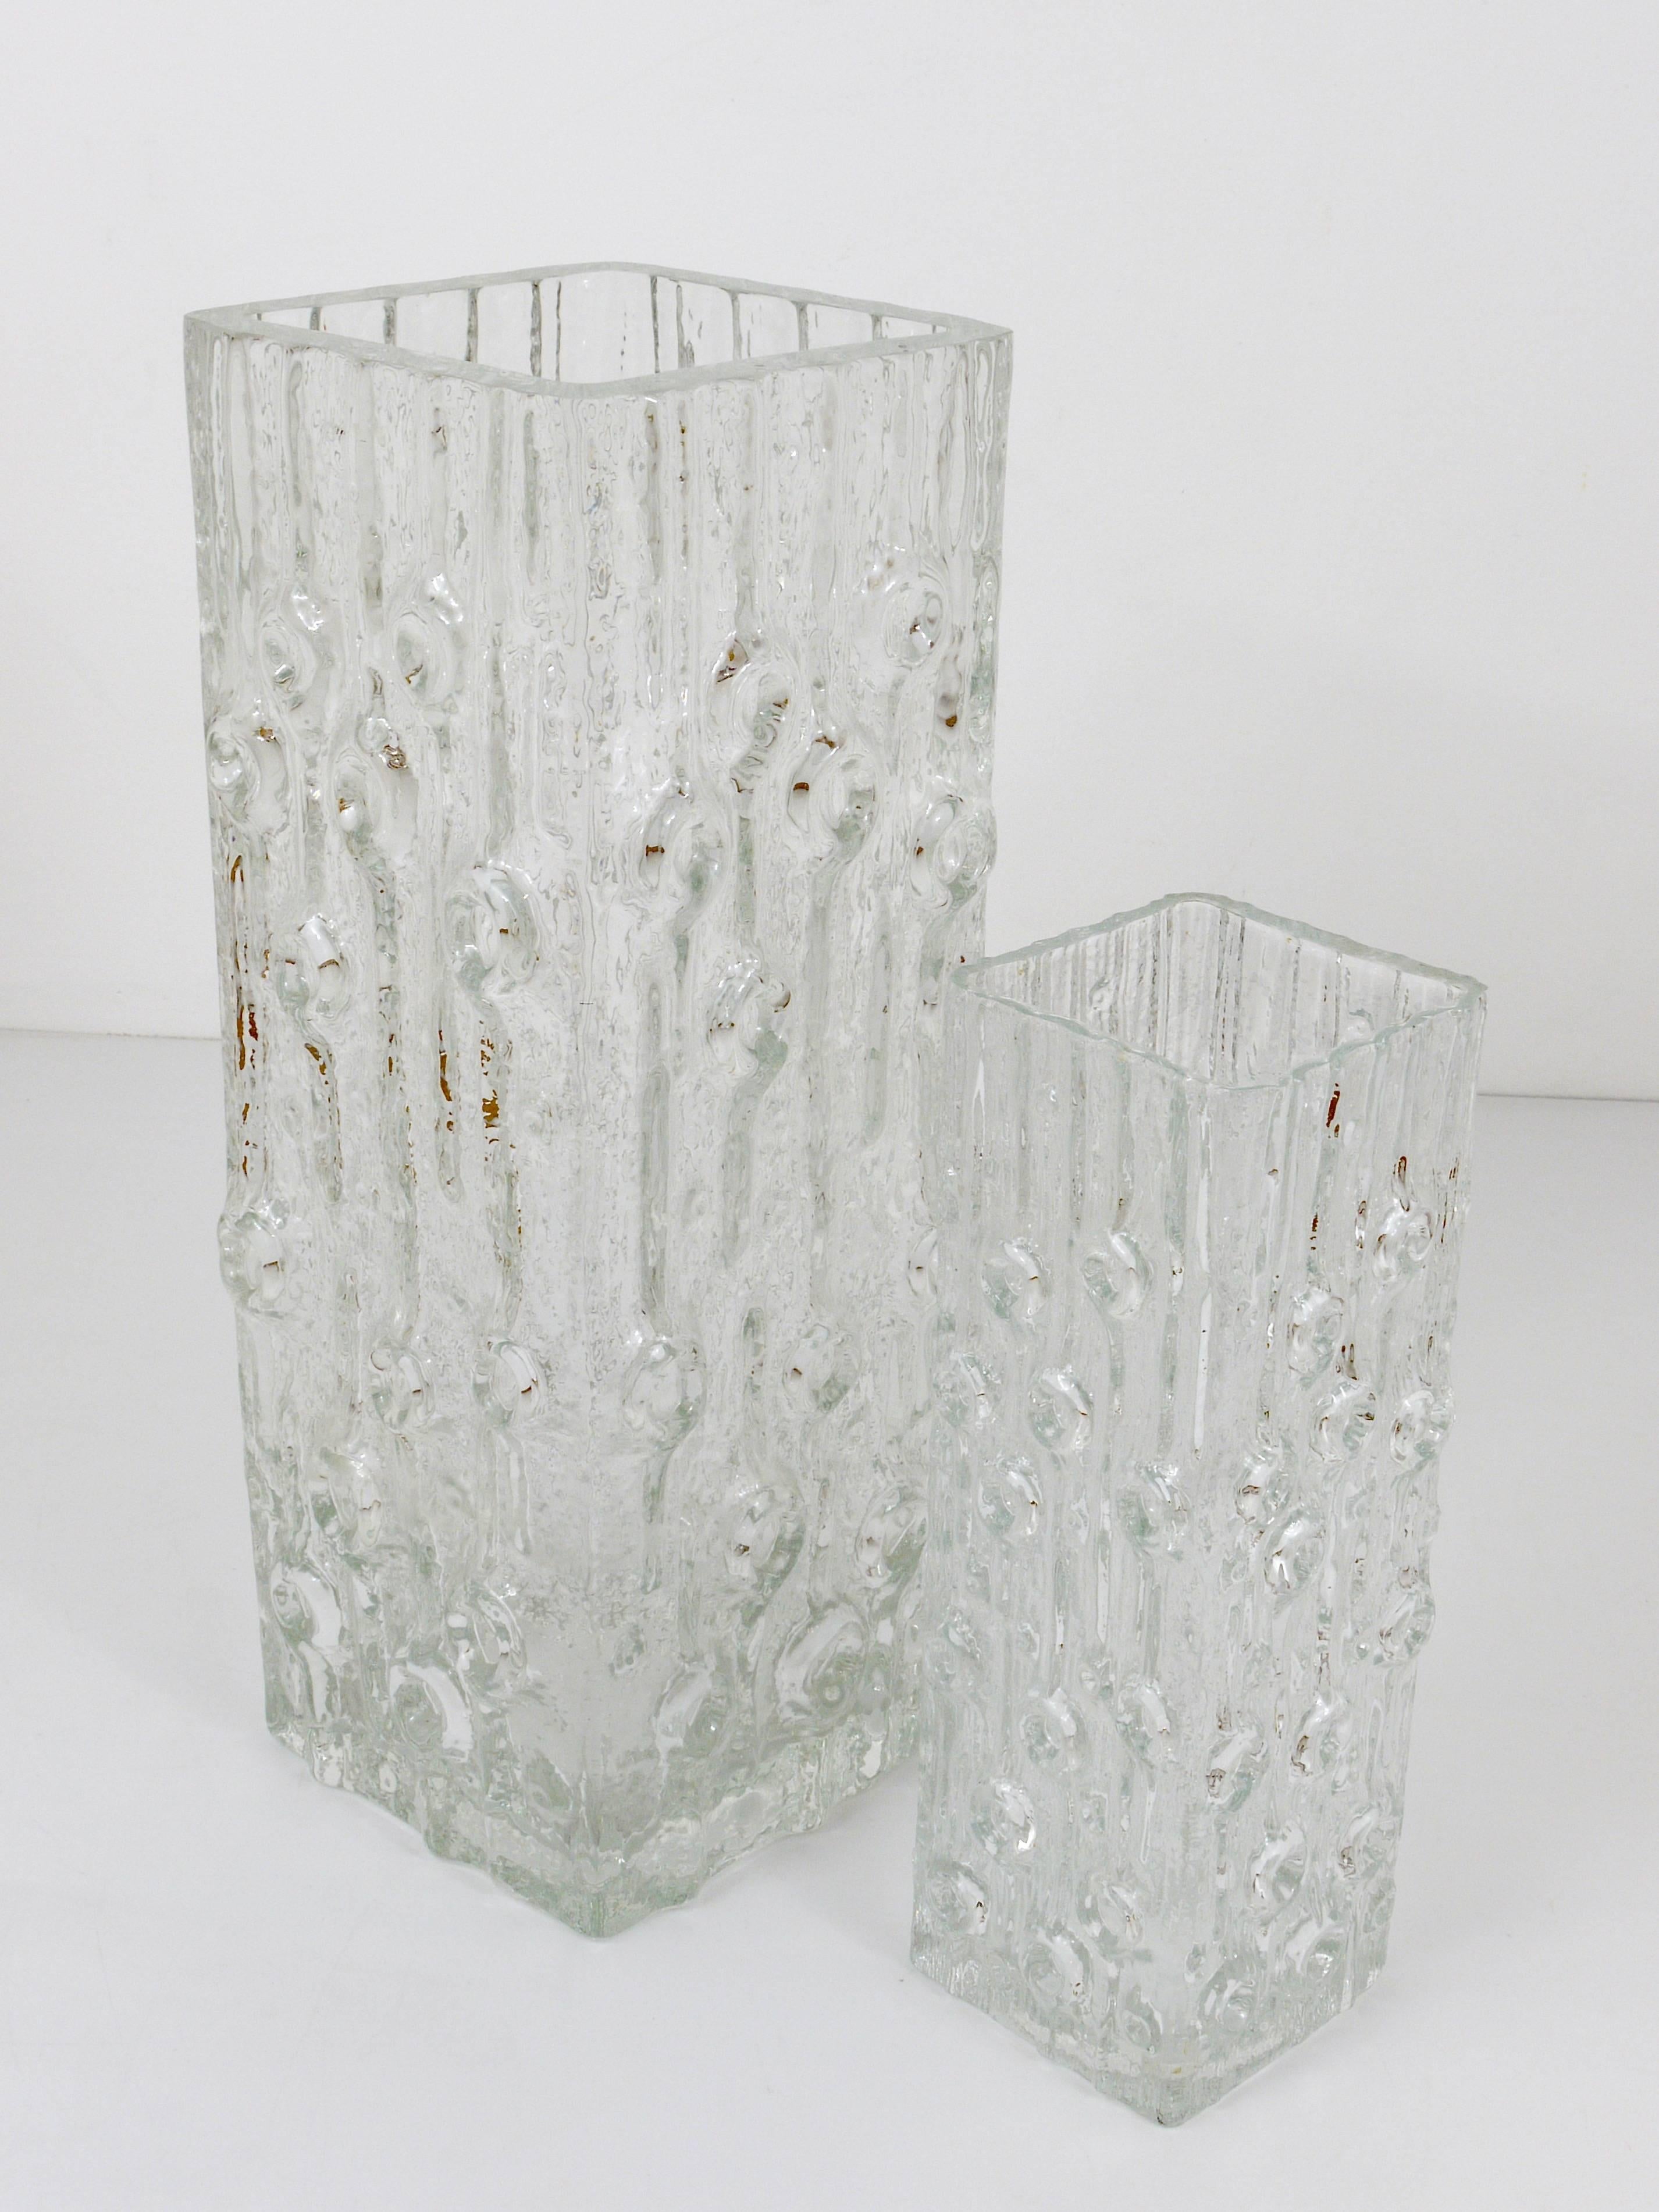 Peill & Putzler Op Art Square Modernist Ice Glass Vase, Germany, 1970s For Sale 3